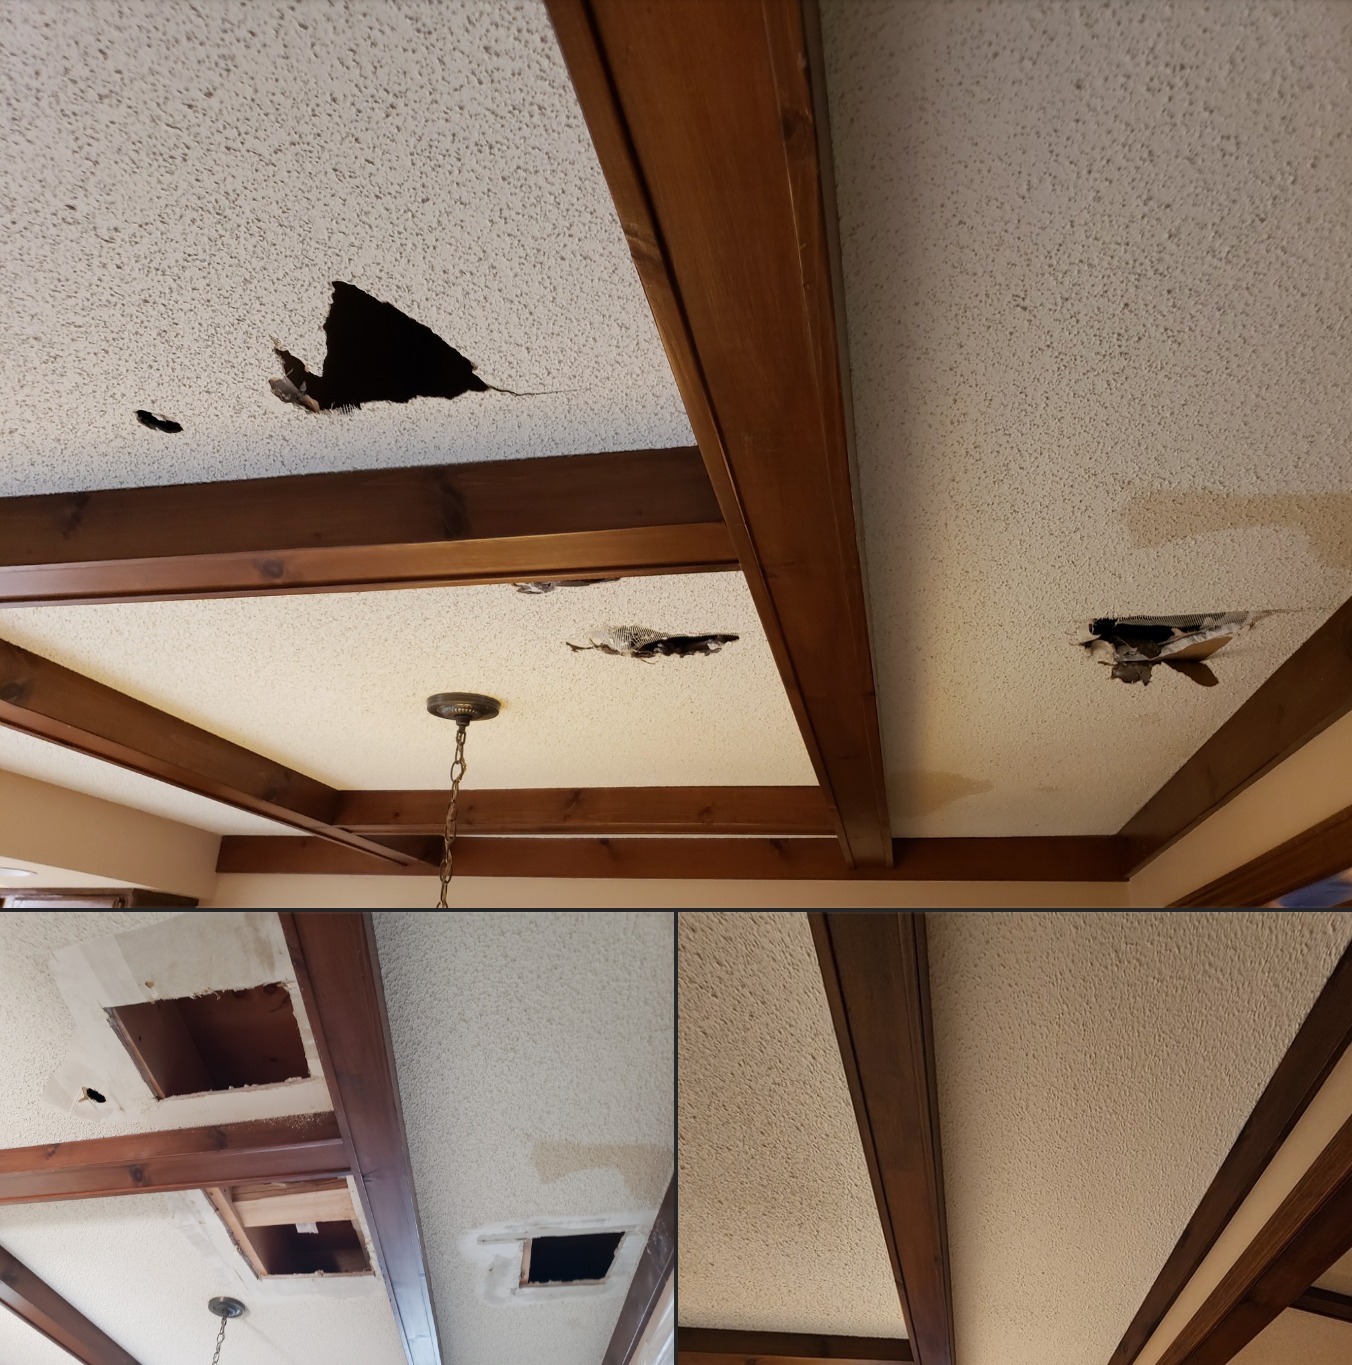 Carrigan Painting portfolio image of popcorn ceiling damage from plumbers in East Amherst NY